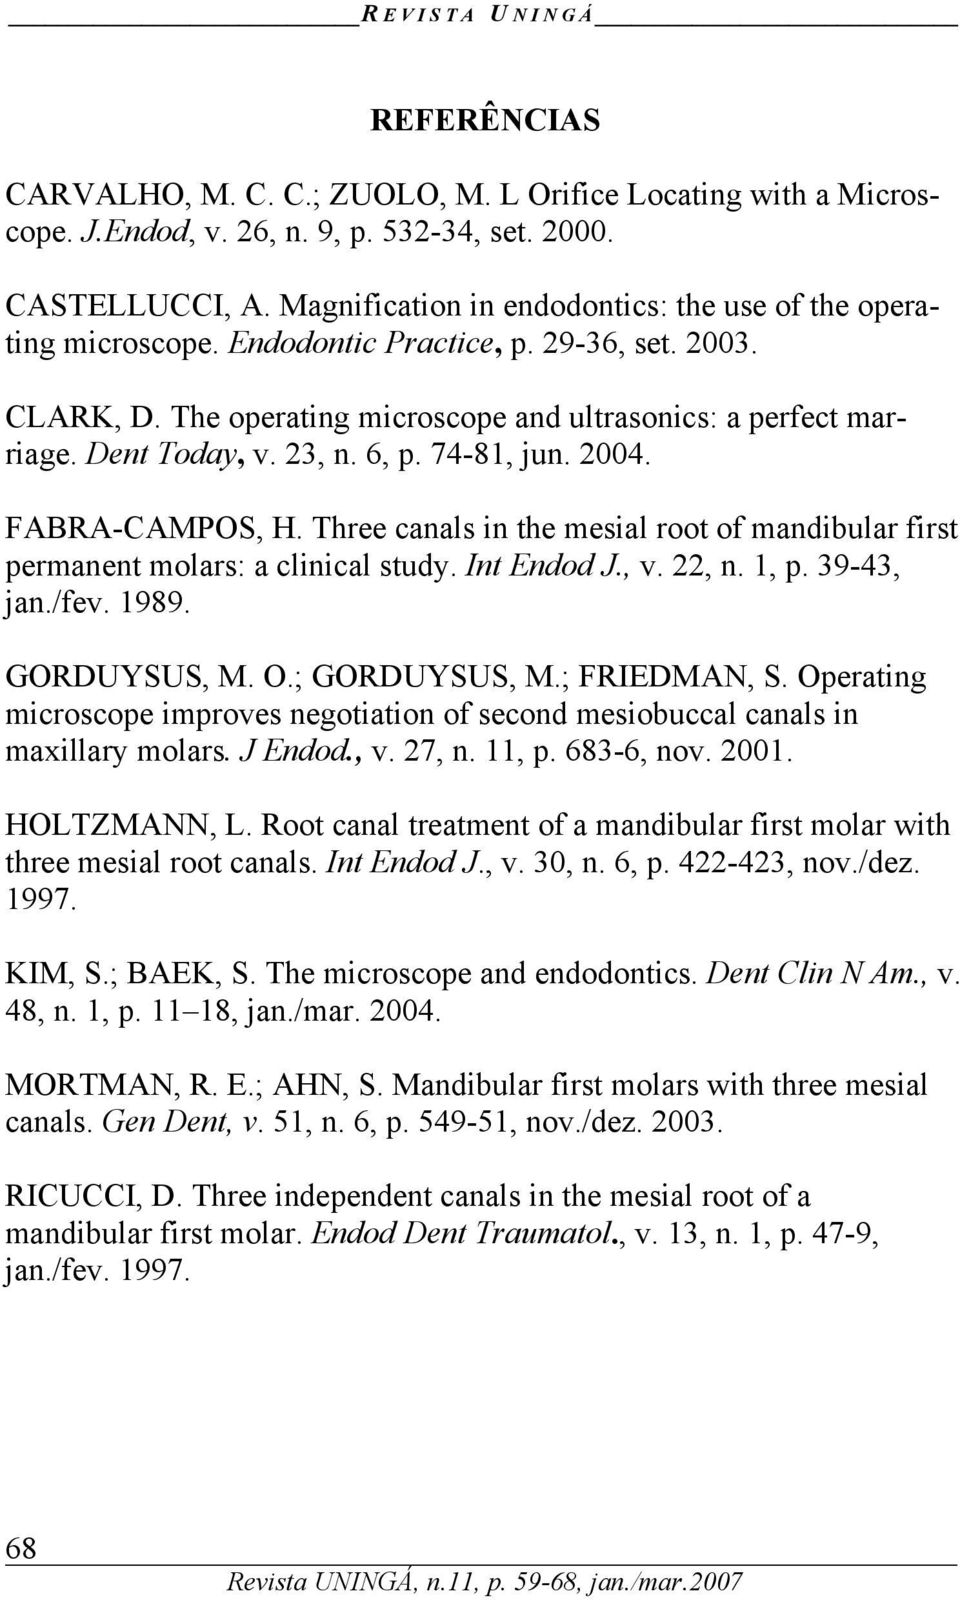 23, n. 6, p. 74-81, jun. 2004. FABRA-CAMPOS, H. Three canals in the mesial root of mandibular first permanent molars: a clinical study. Int Endod J., v. 22, n. 1, p. 39-43, jan./fev. 1989.